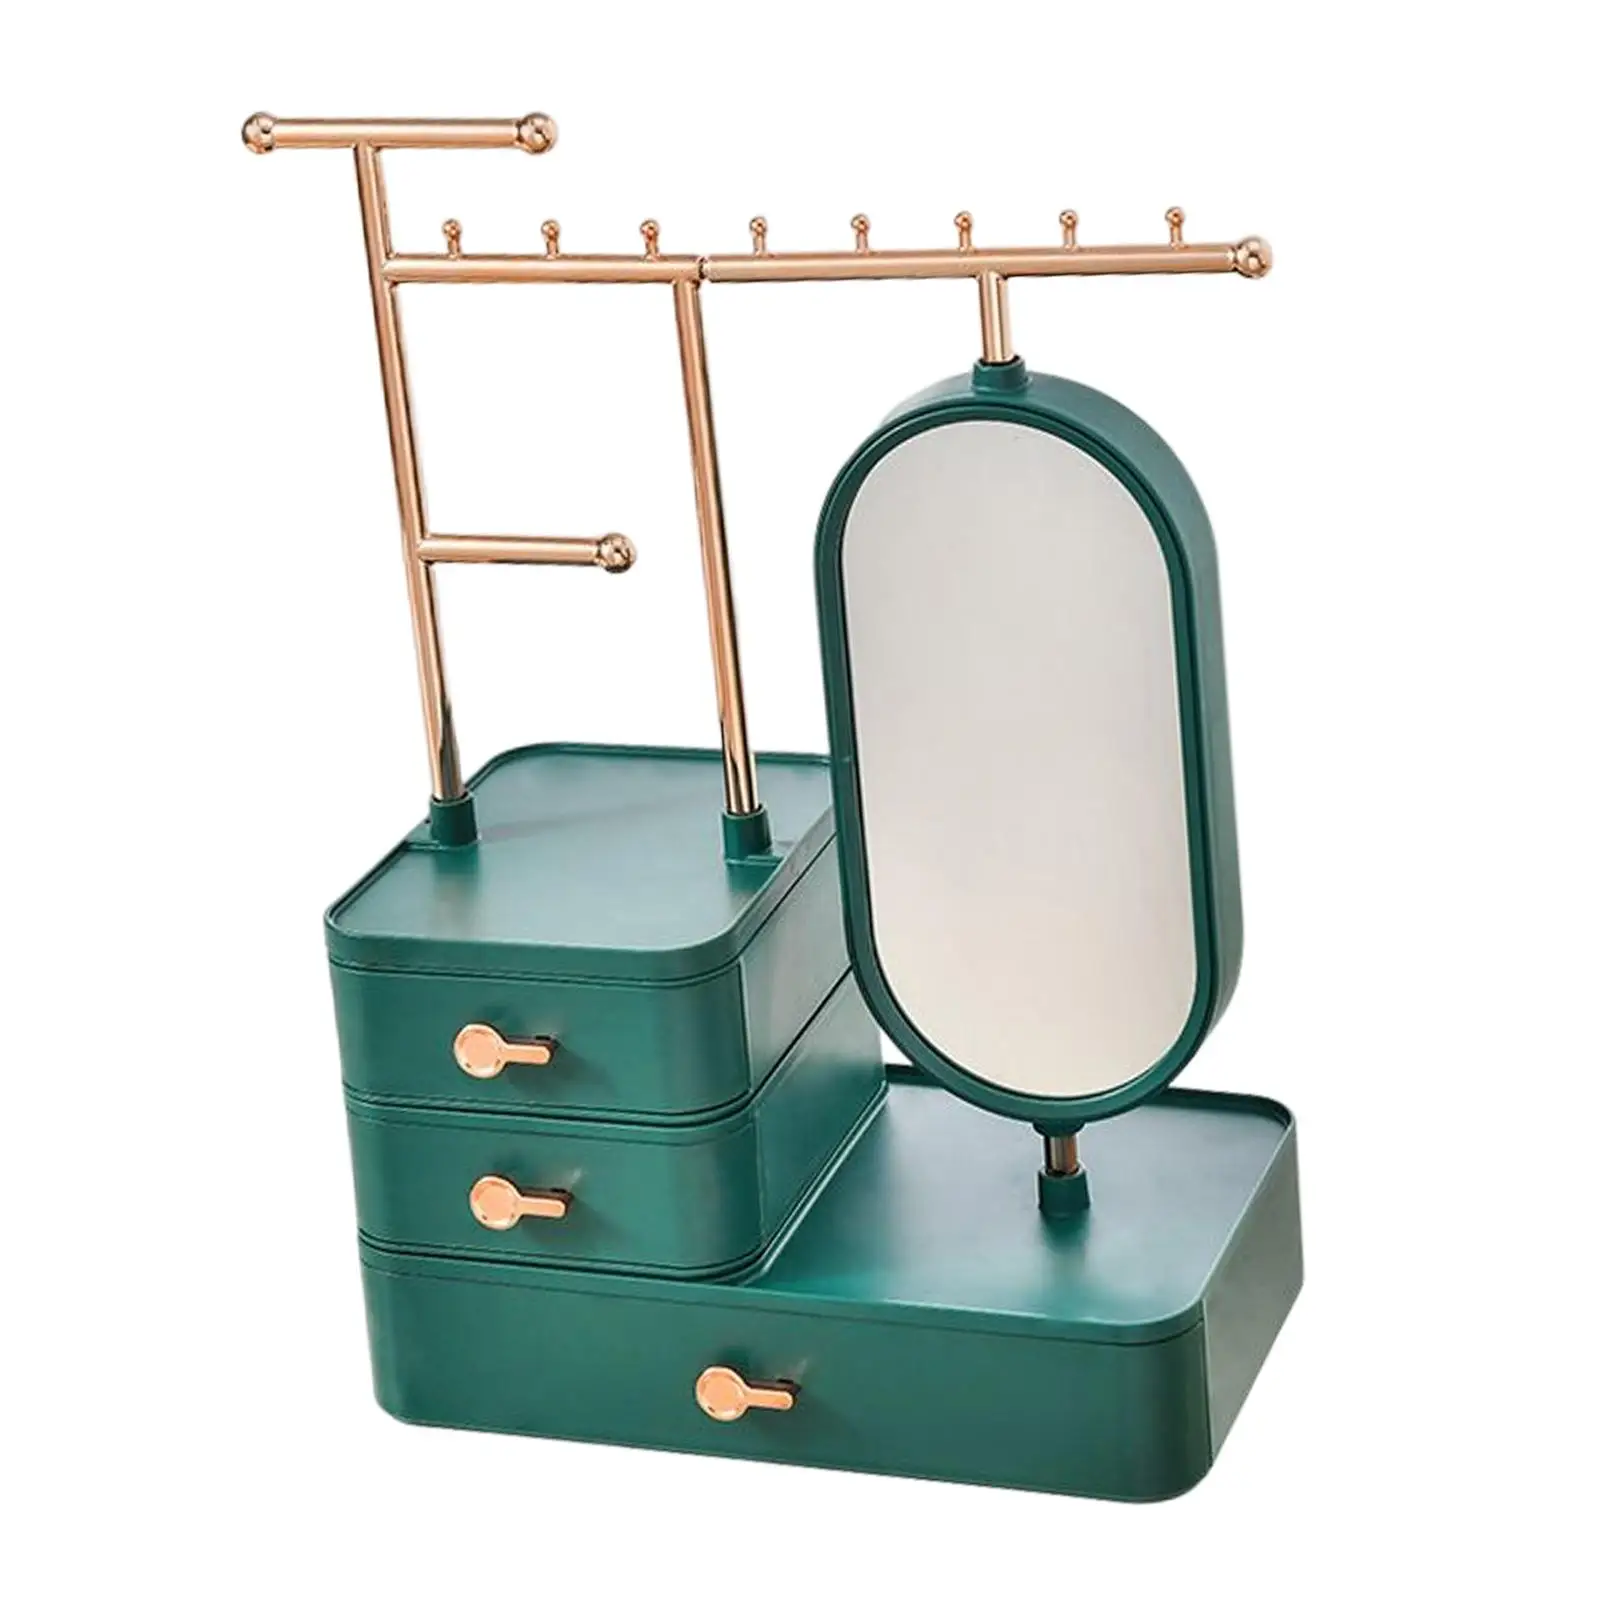 Make up Jewelry Storage with Mirror with 3 Drawers Dustpoof Earrings Bracelet Necklace Stand for Tabletop Desk Tidy Girls Women